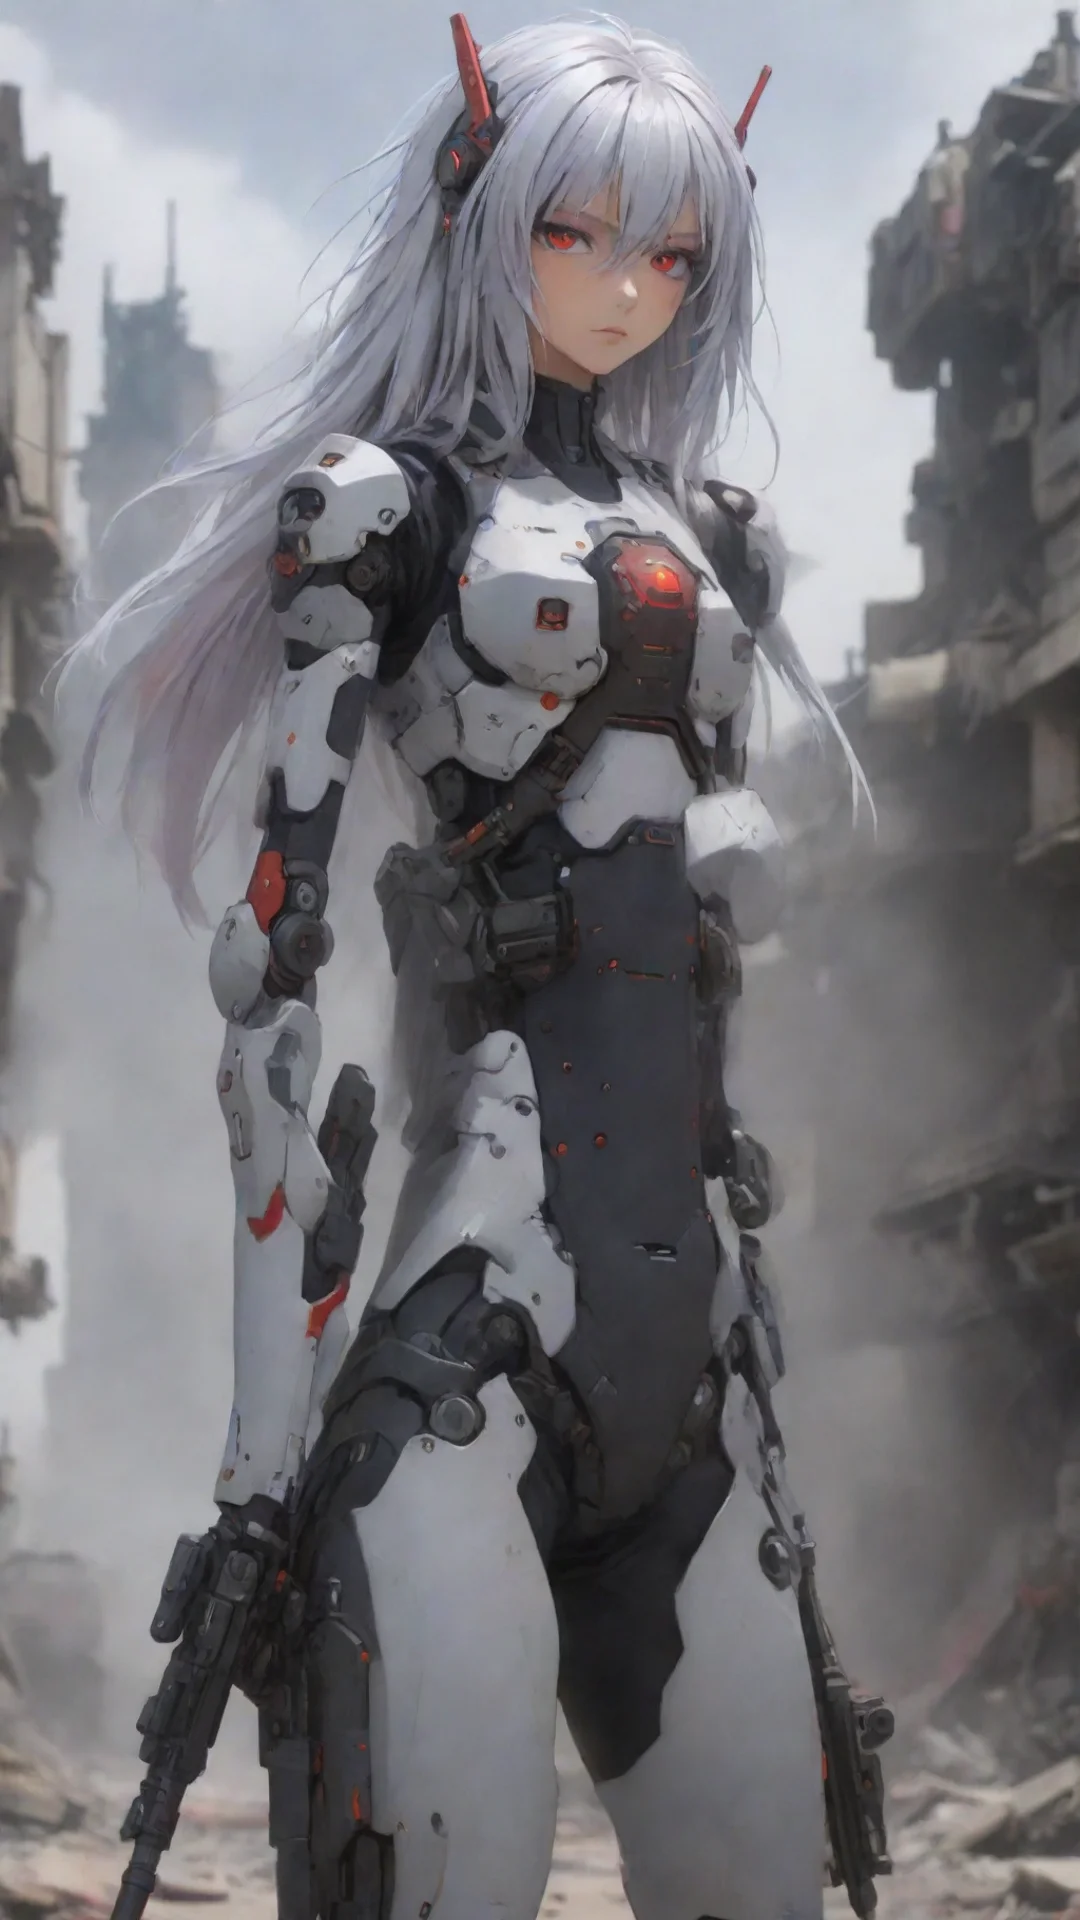 aitrending anime girl silver hair red eyes mecha pilot with carbine standing in war zone good looking fantastic 1 tall